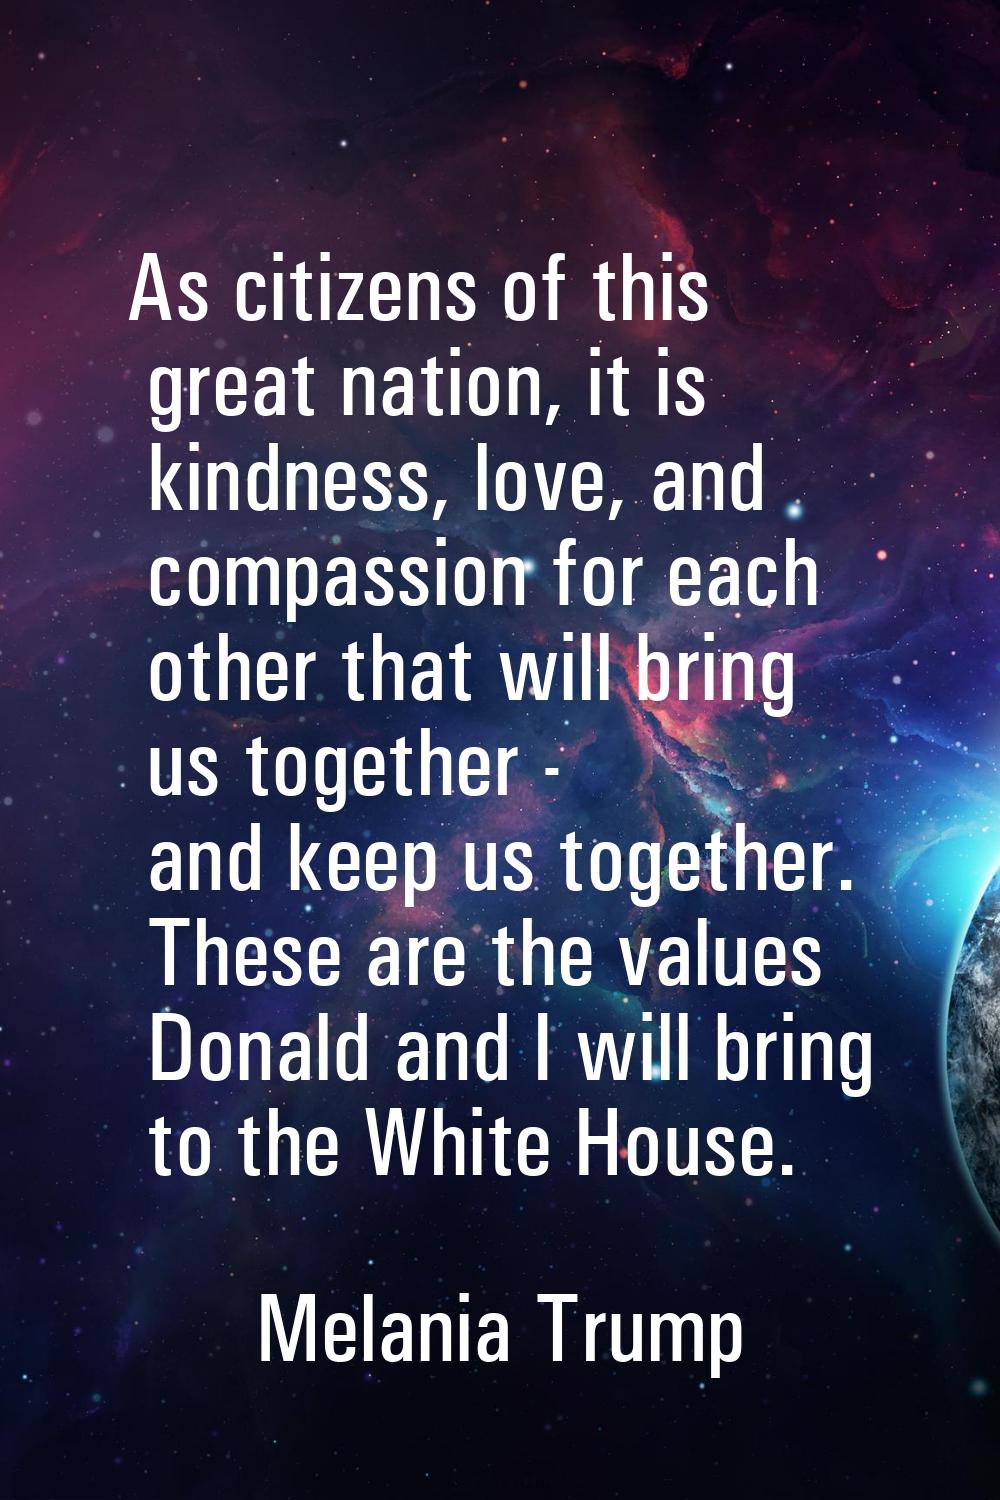 As citizens of this great nation, it is kindness, love, and compassion for each other that will bri